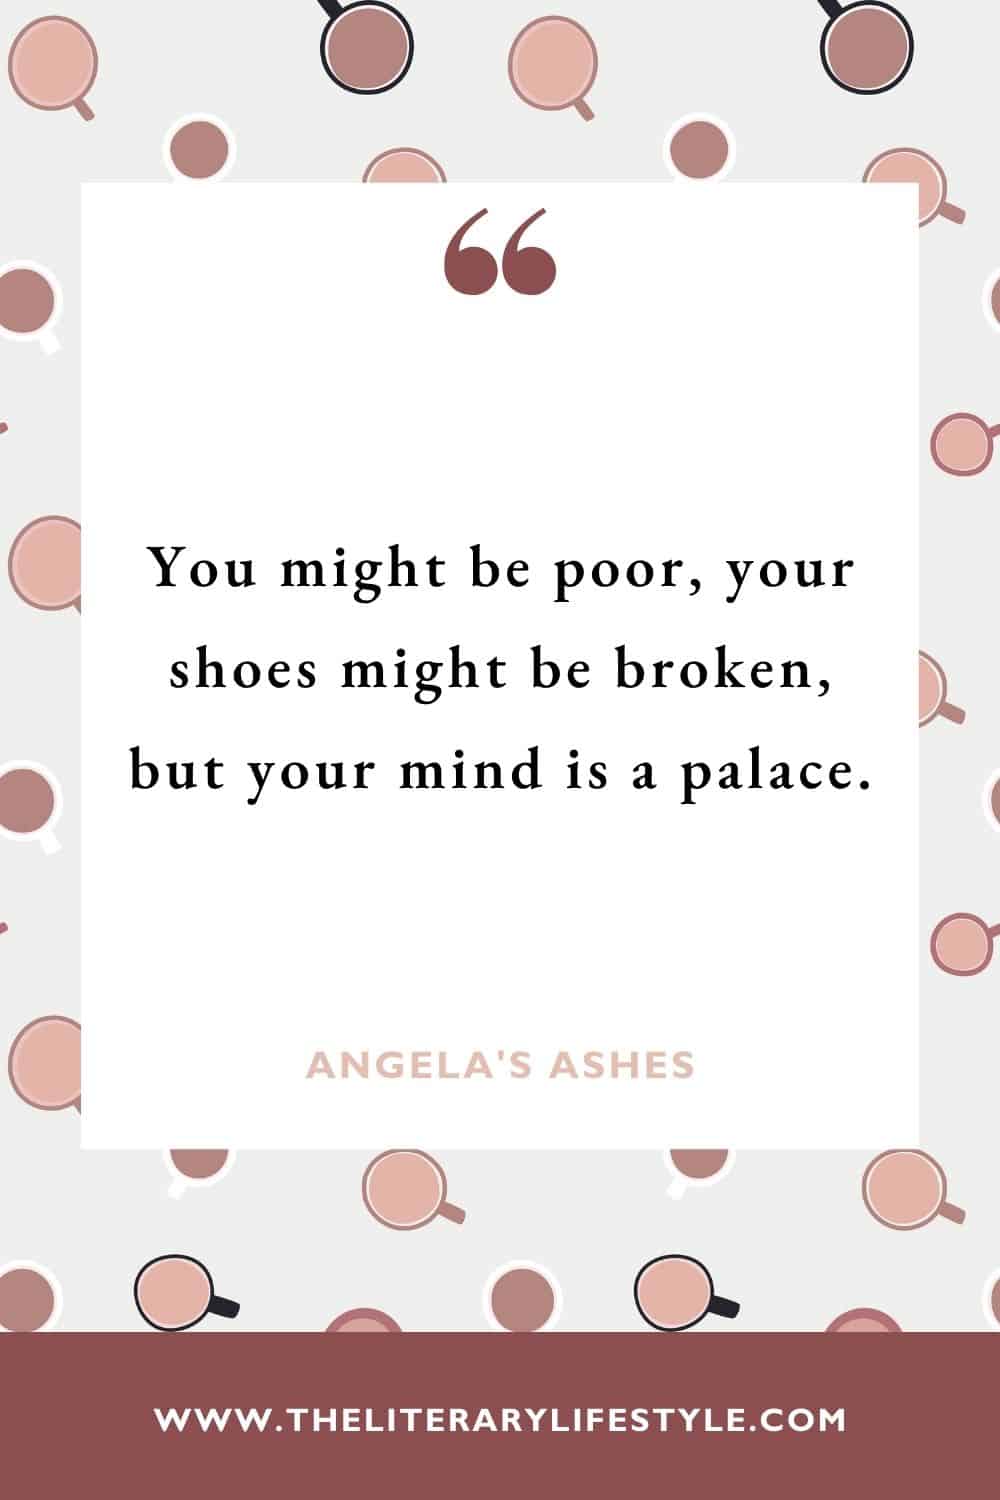 angelas ashes quote about being poor